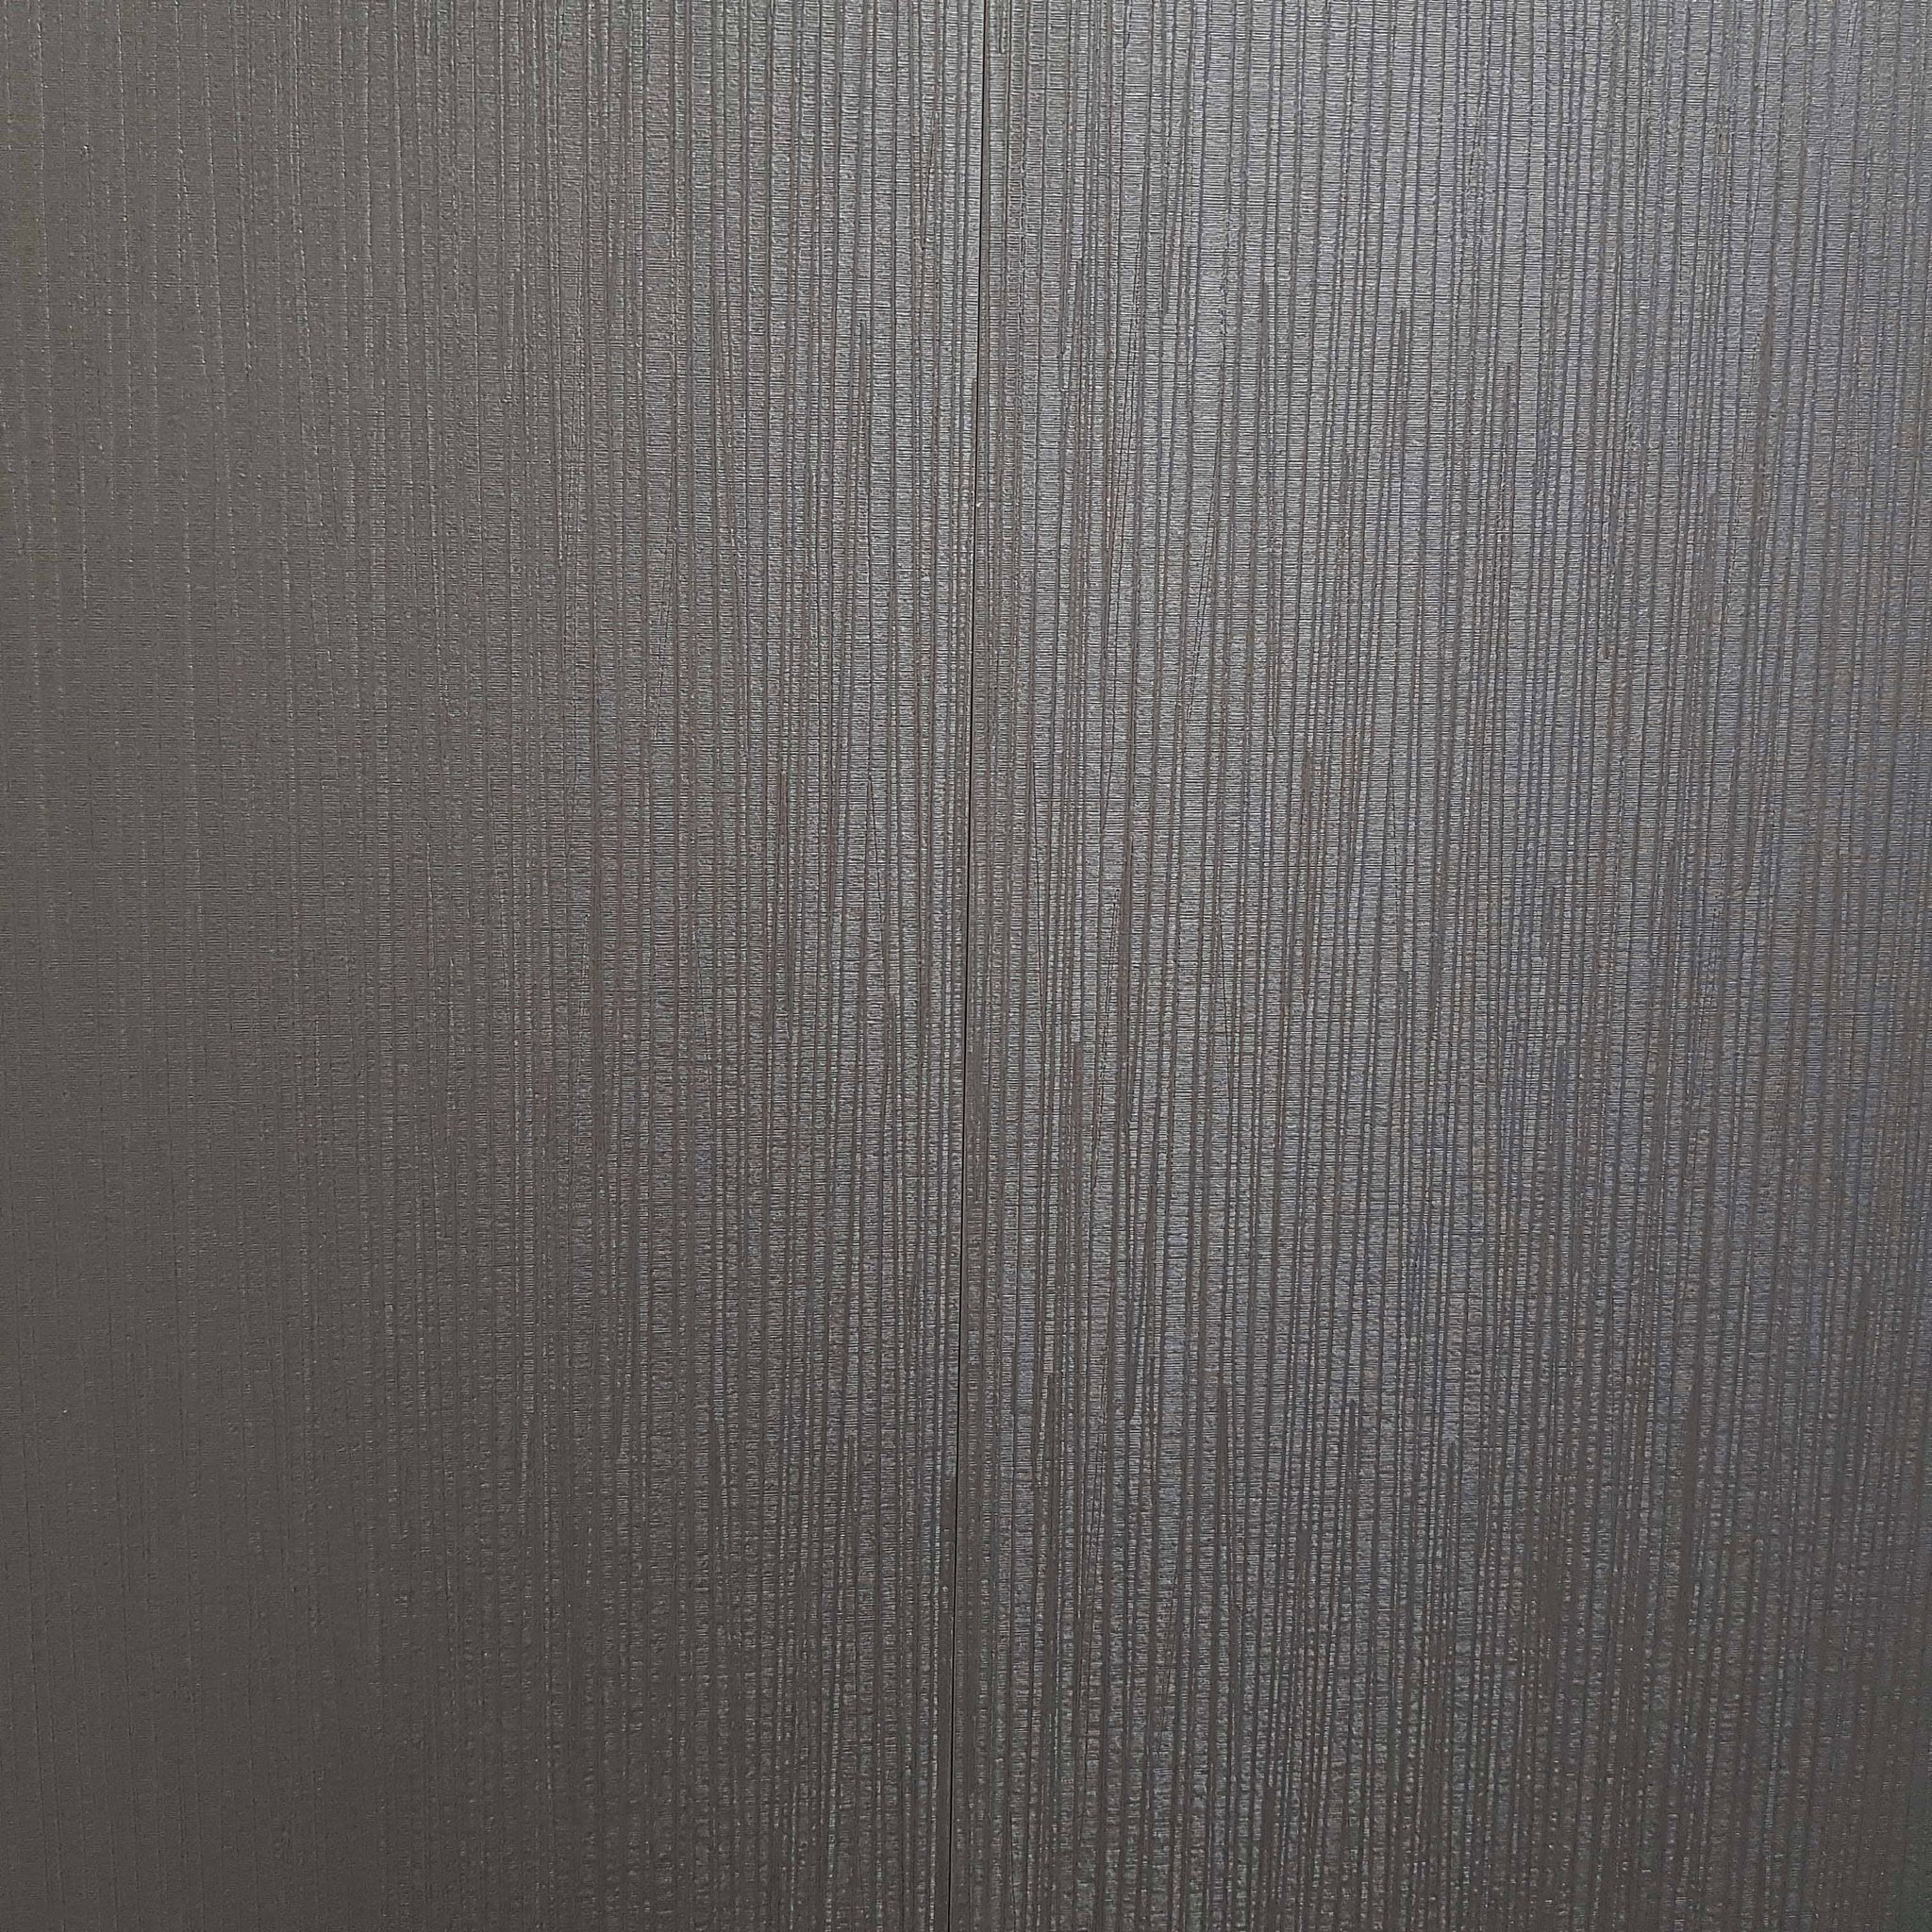 Taupe Brown/Grey Sheen Linear Decorative Wall Panels 2550mm x 500mm x 9mm (Pack of 2) - Claddtech